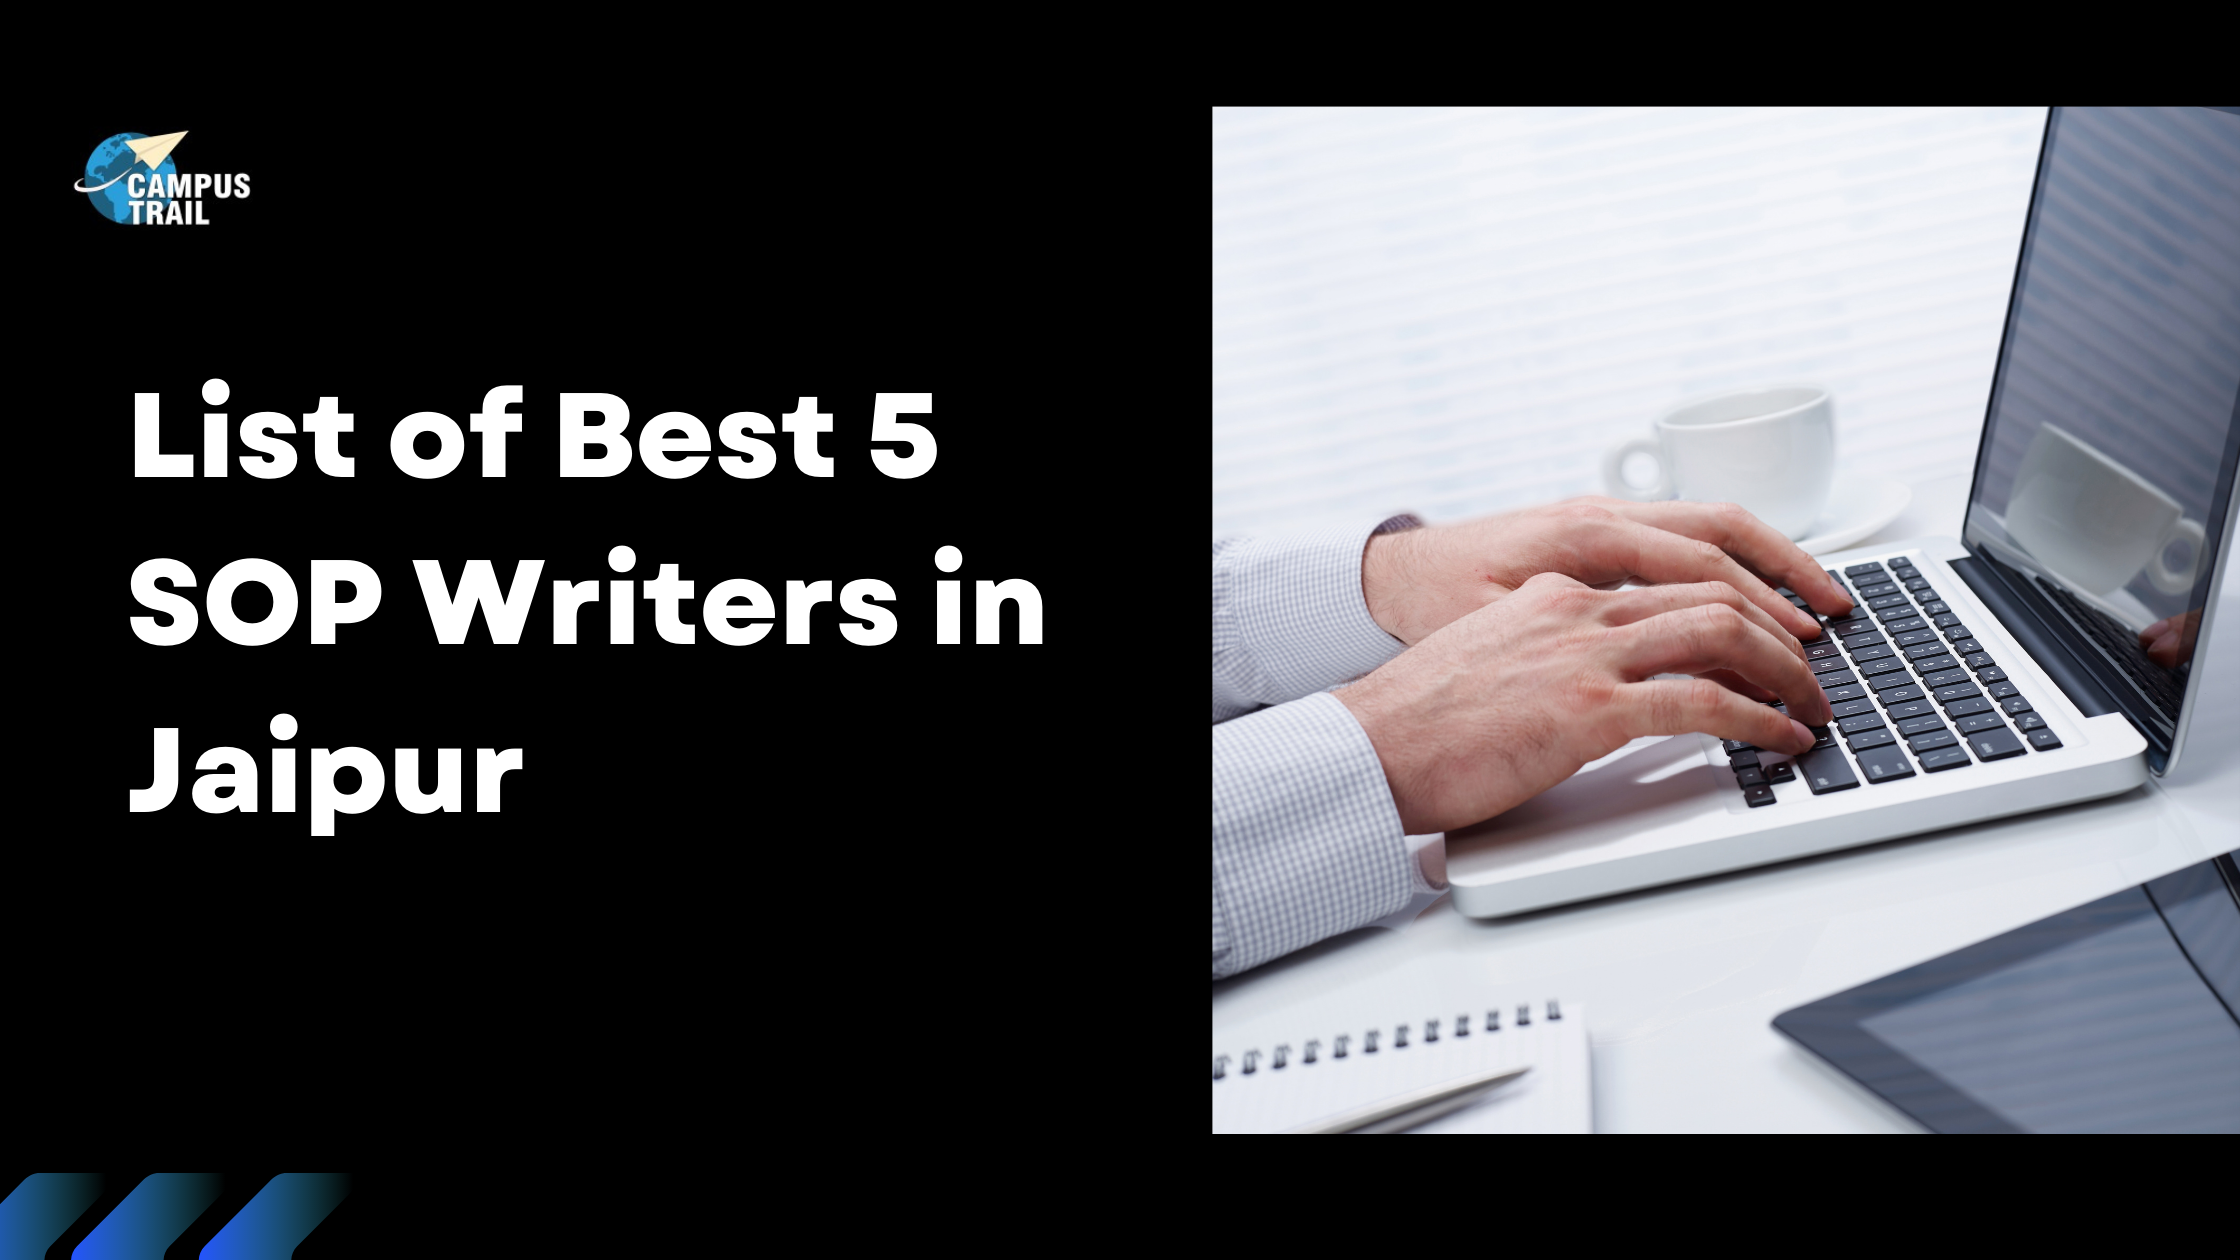 You are currently viewing List of Best 5 SOP Writers in Jaipur [Updated]